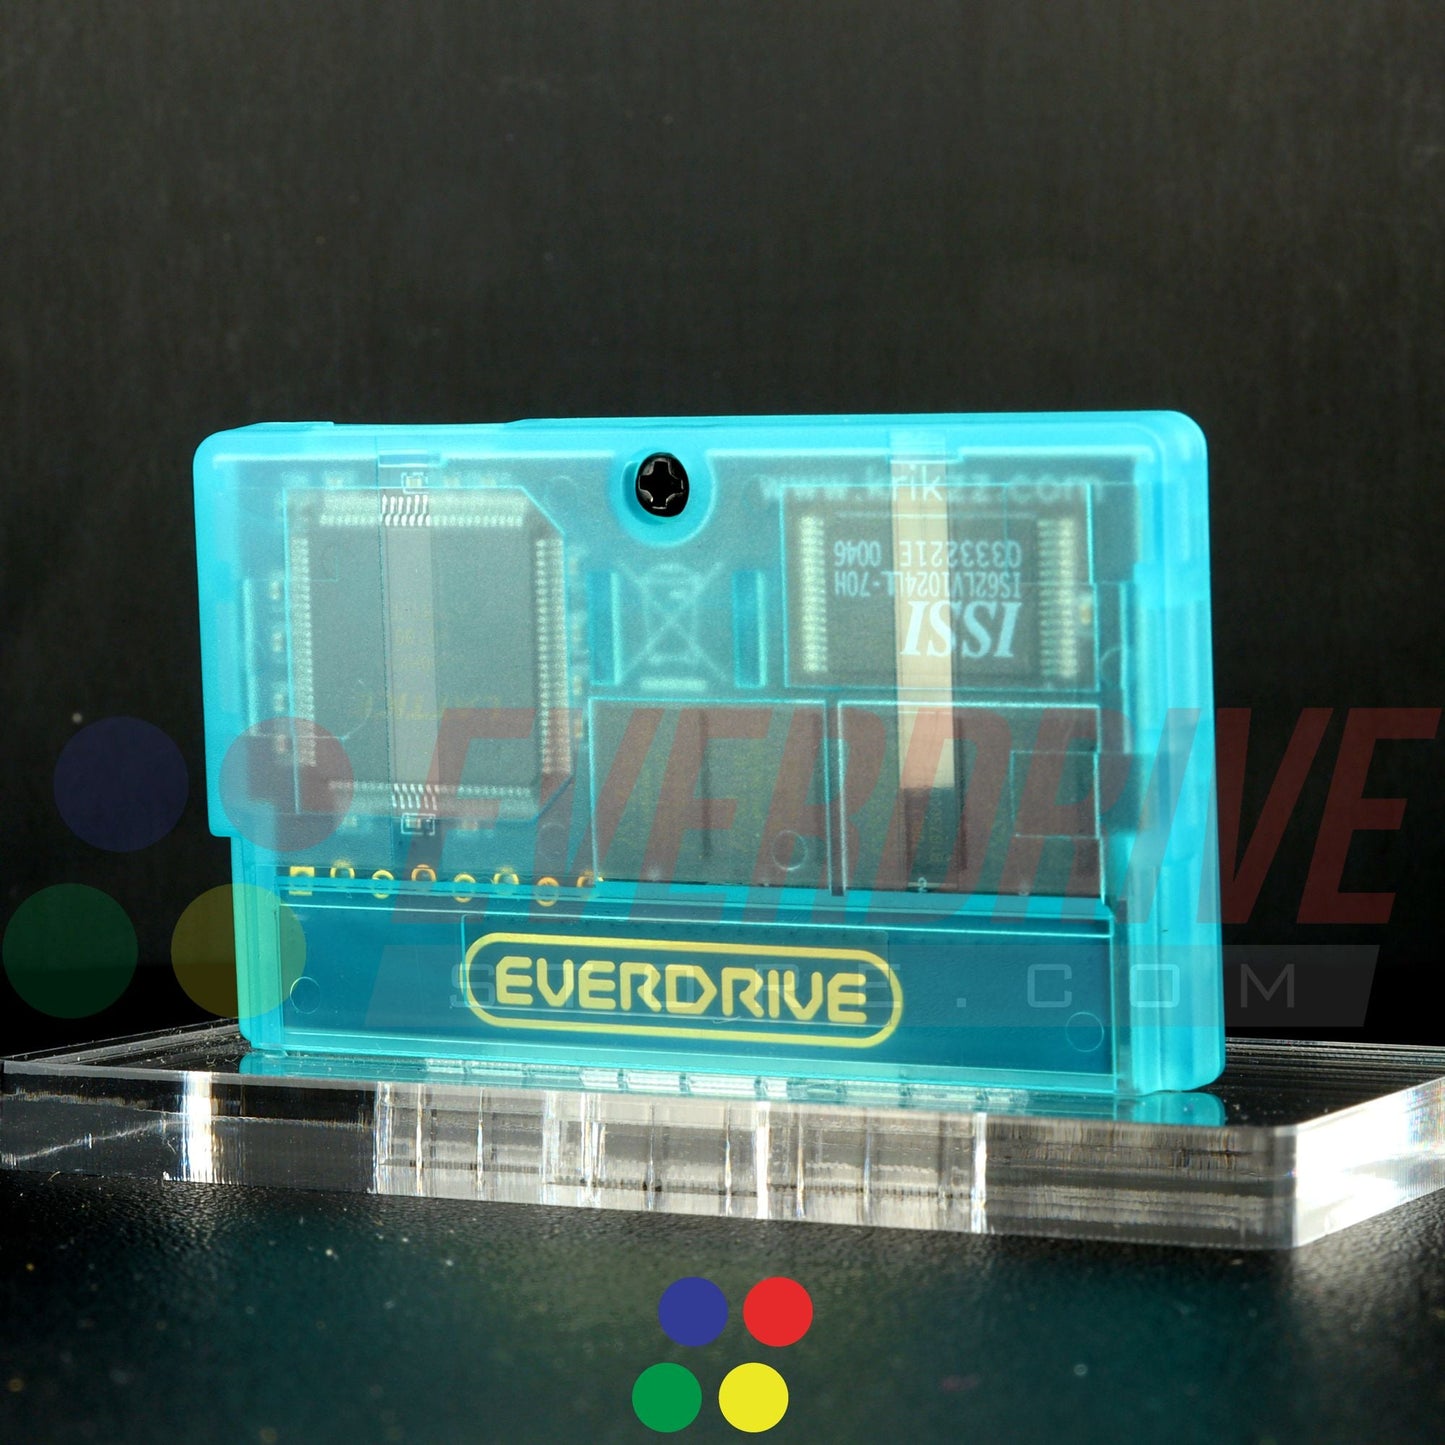 Everdrive GBA Mini - Frosted Turquoise